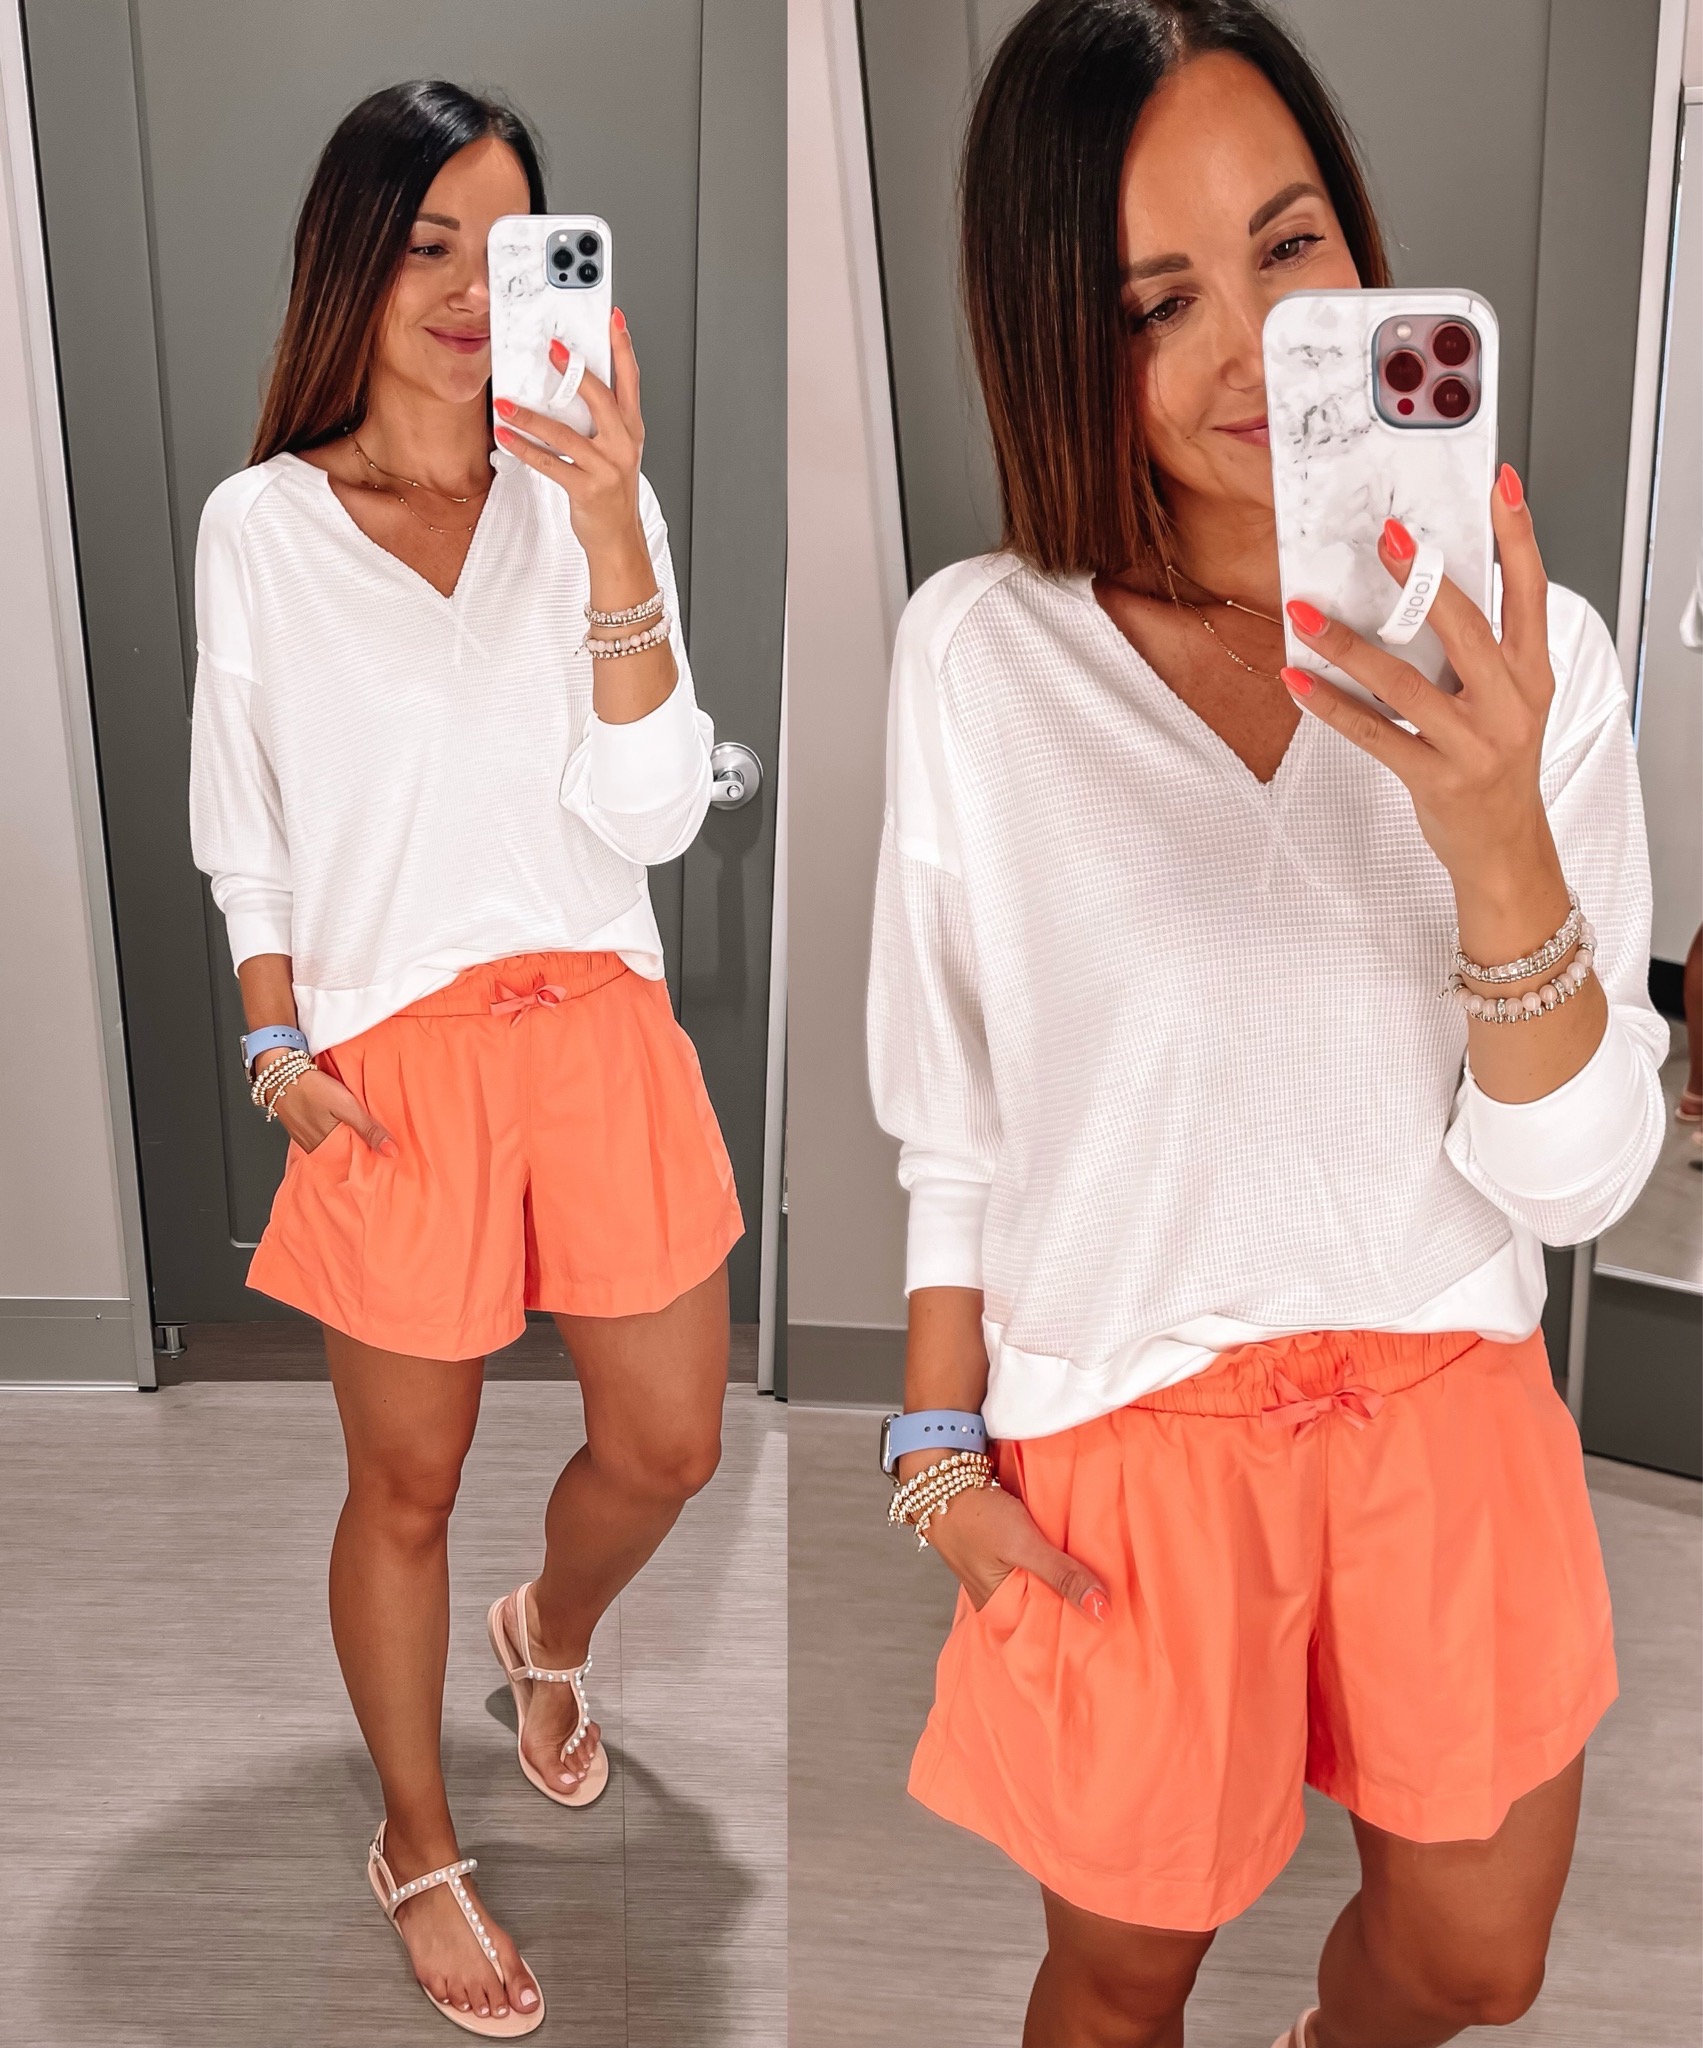 target white top and shorts